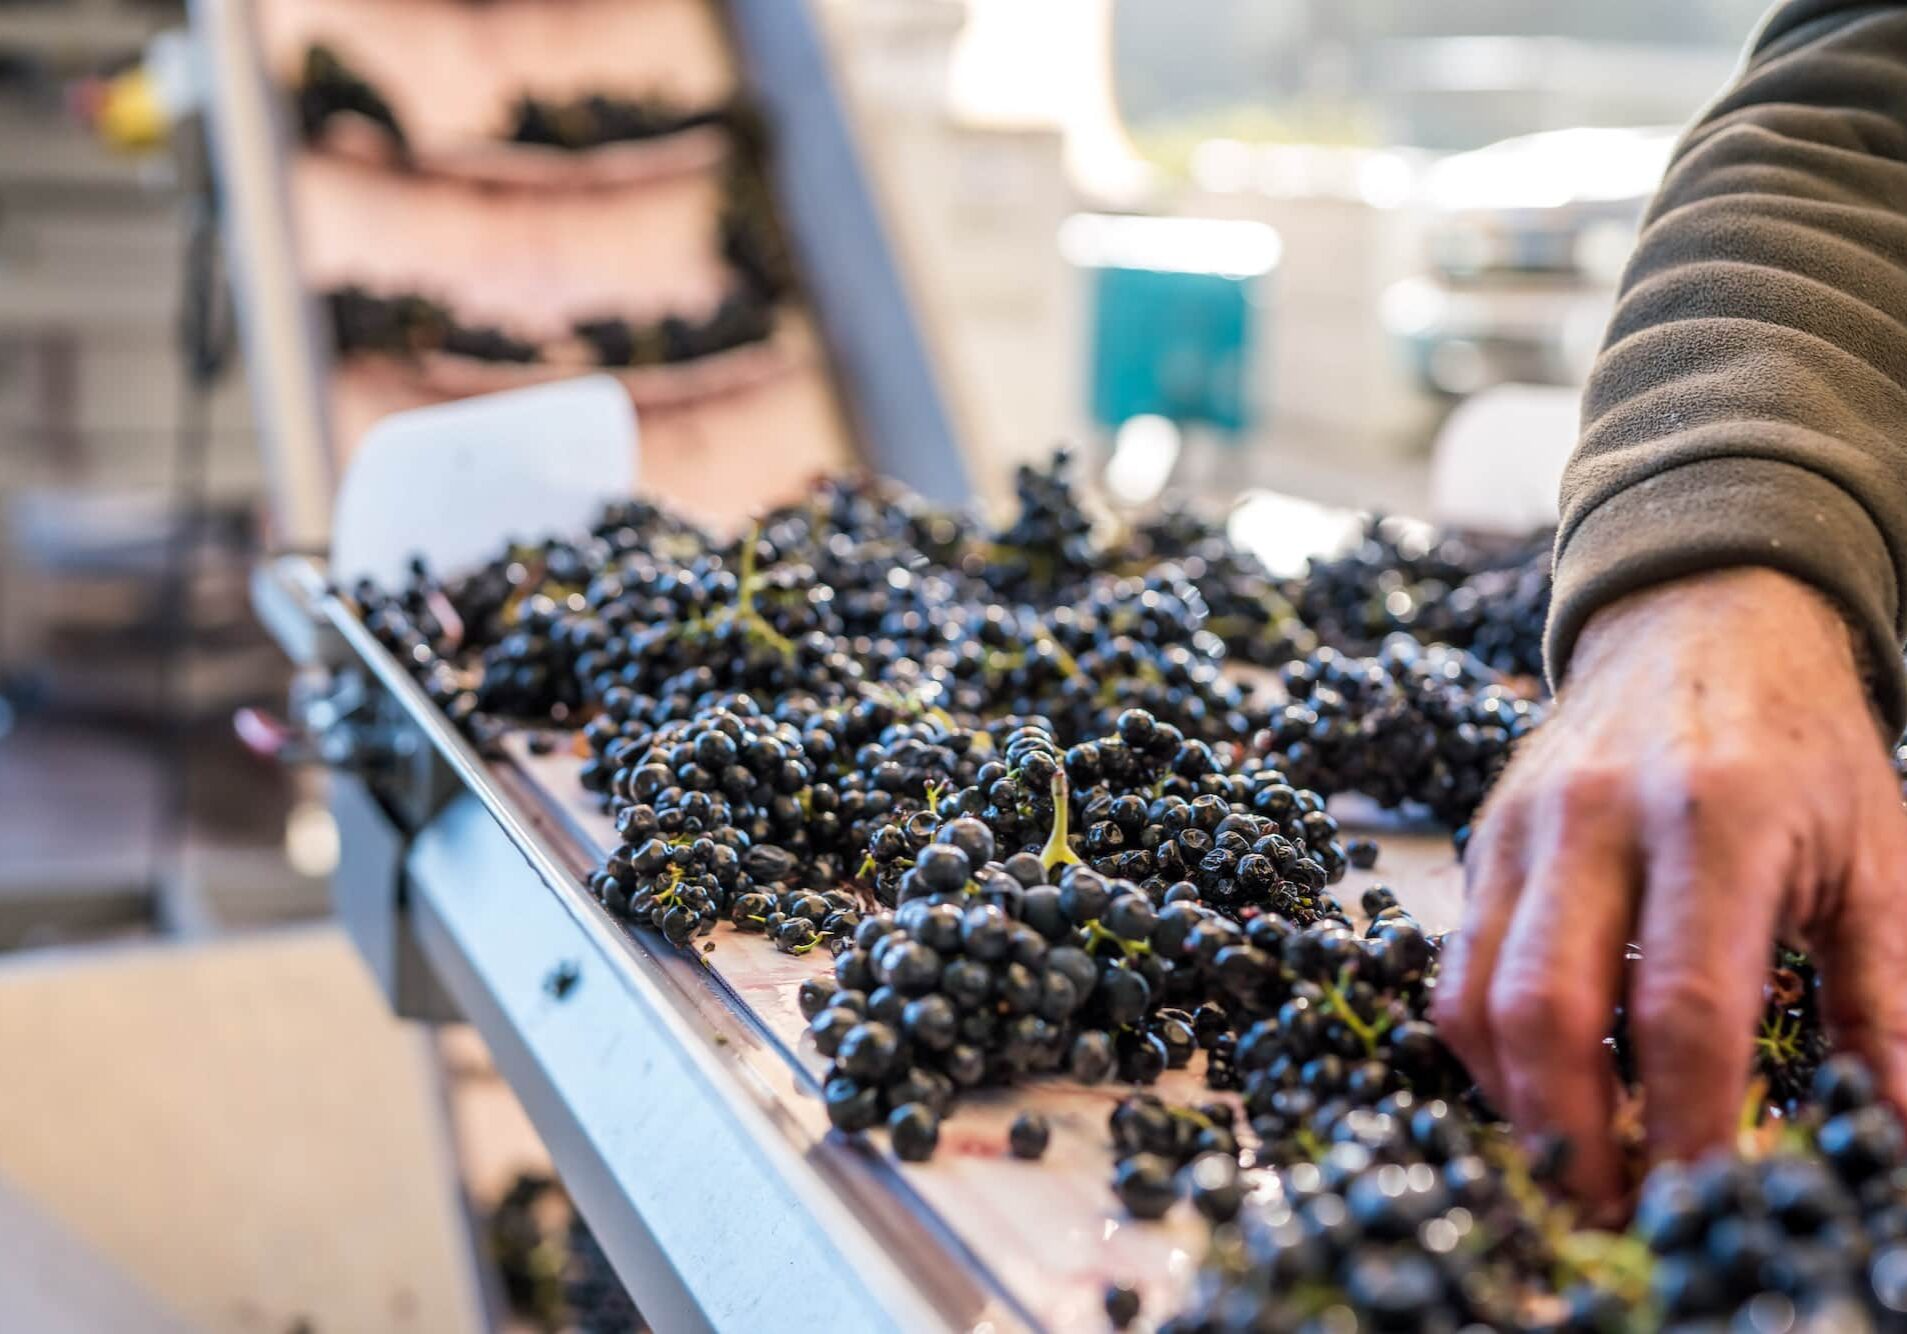 A hand sorting grapes during wine harvest